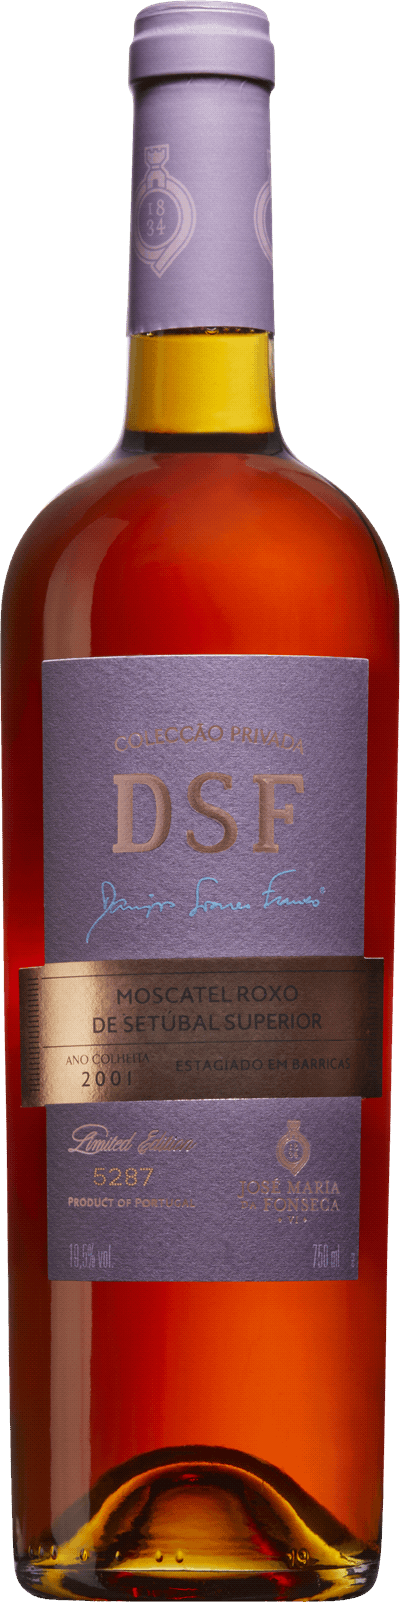 DSF Collection Moscatel Roxo de Systembolaget Superior, Setùbal 2001 